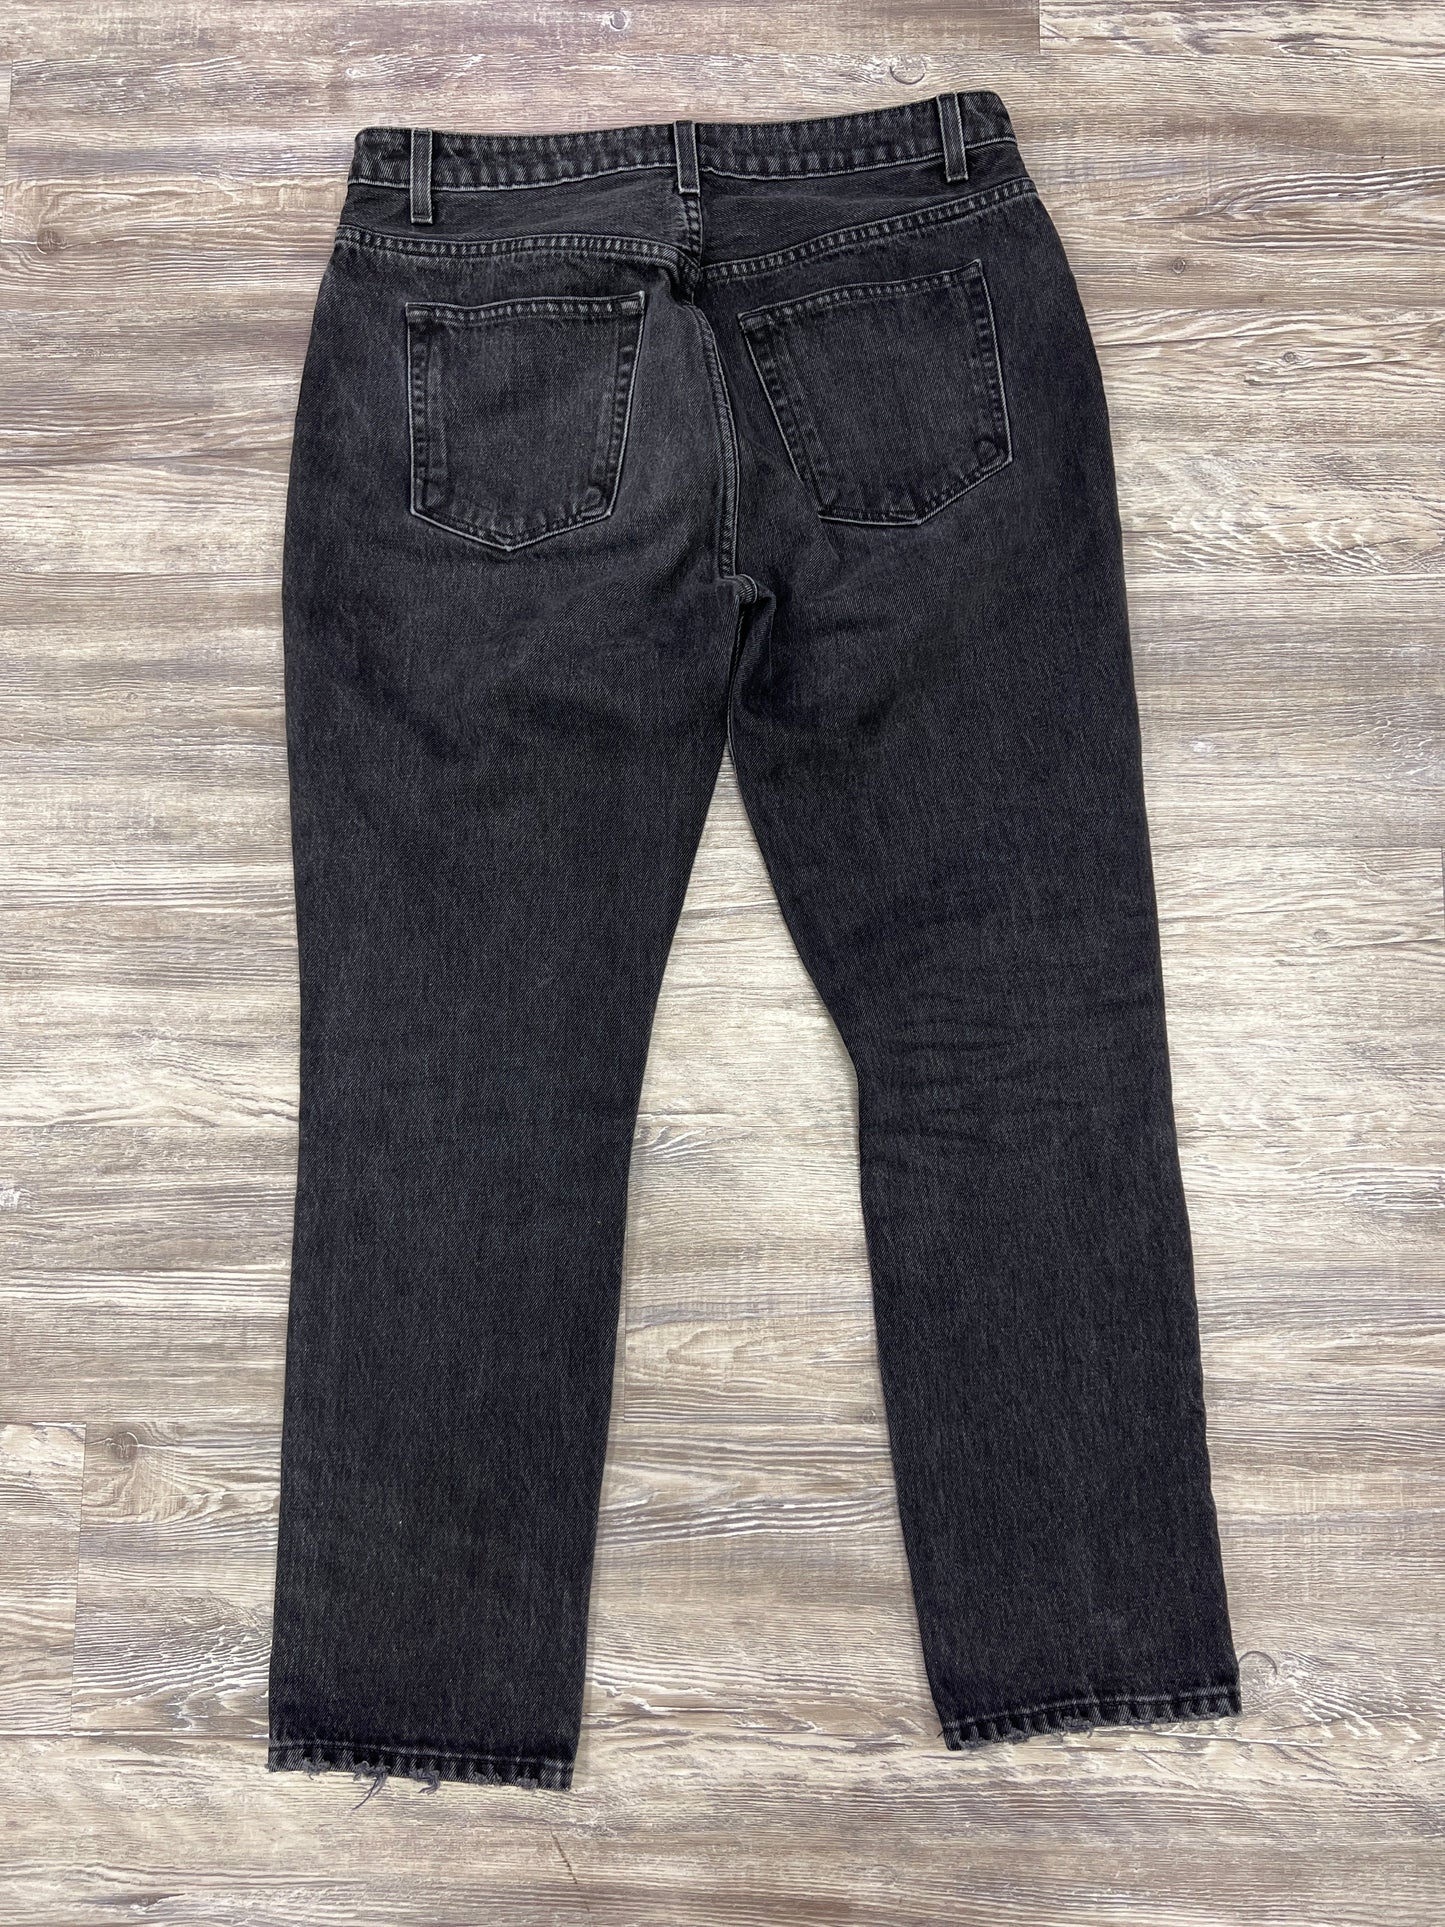 Jeans Straight By Reformation Size: 12